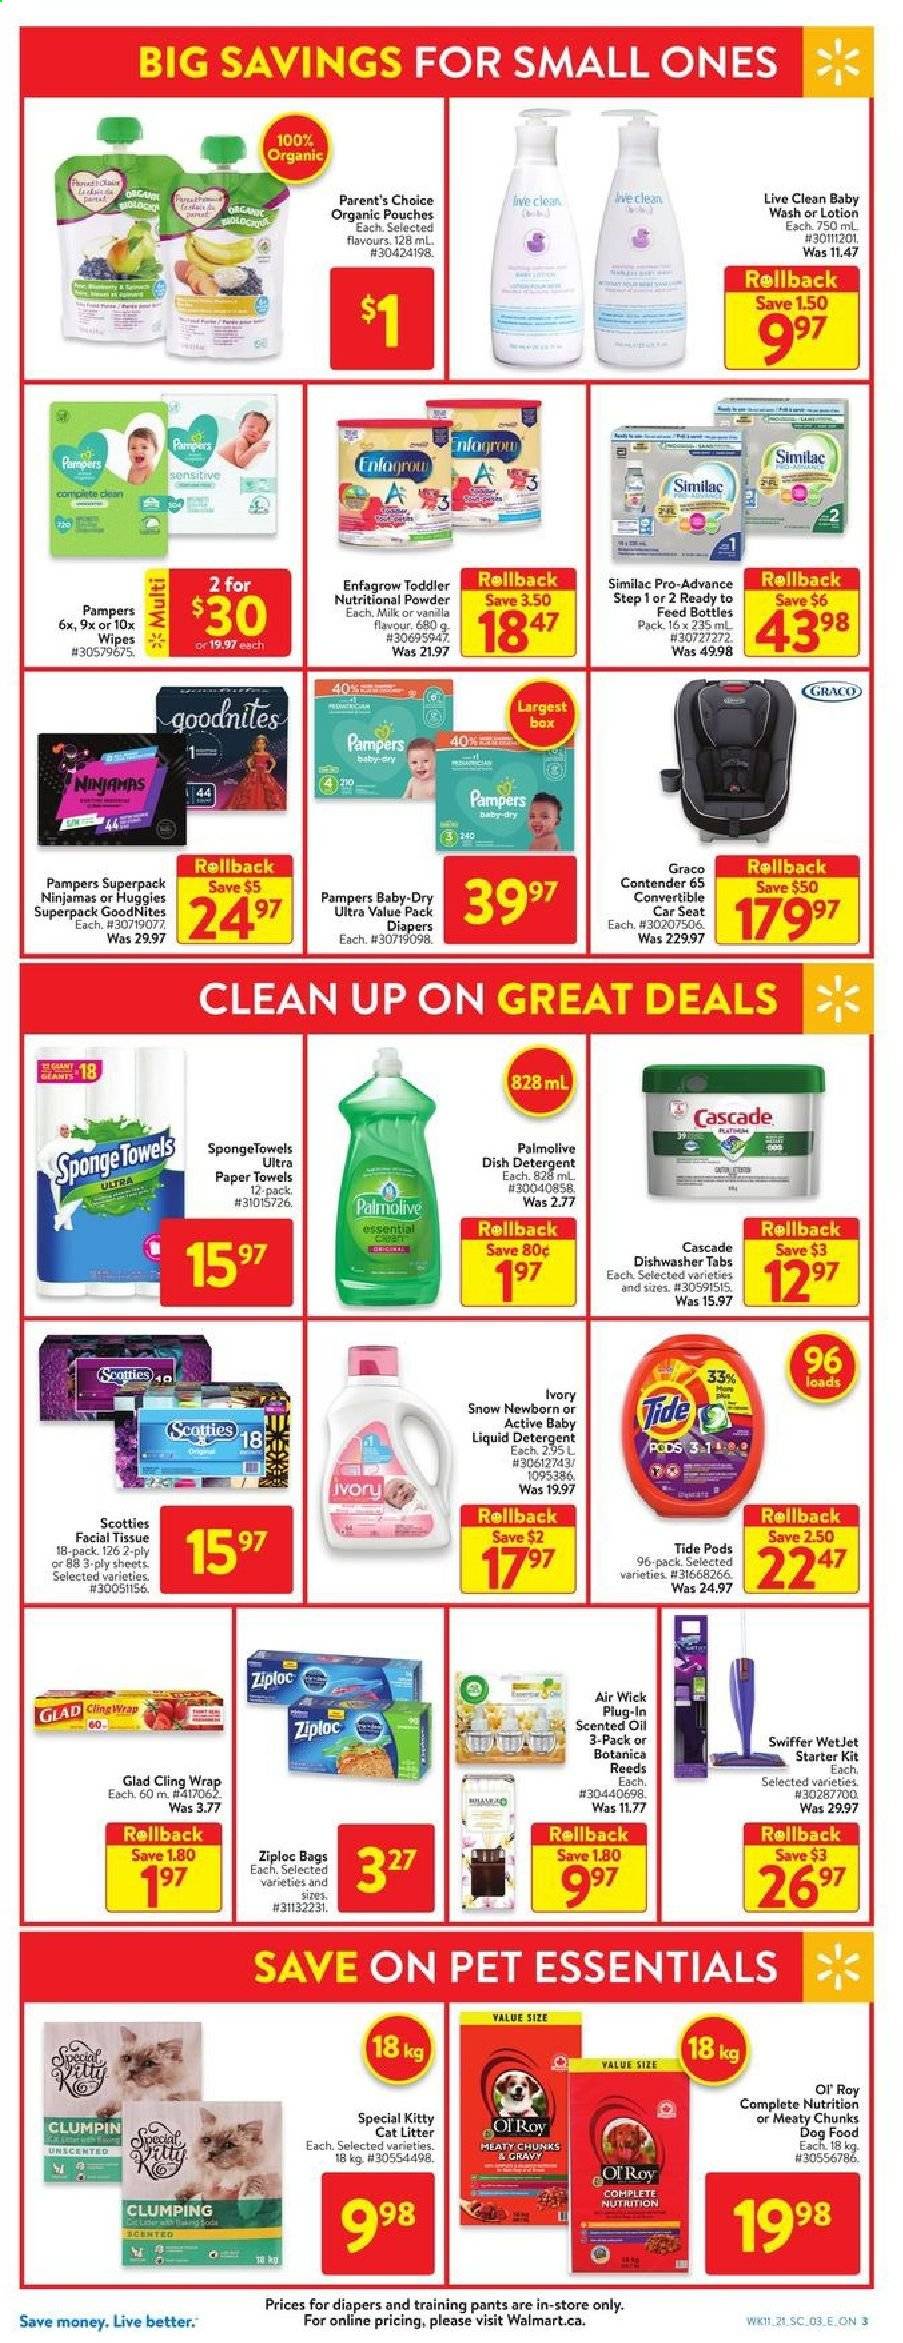 thumbnail - Walmart Flyer - April 08, 2021 - April 14, 2021 - Sales products - milk, oil, Similac, wipes, pants, nappies, baby pants, tissues, kitchen towels, paper towels, Swiffer, Tide, liquid detergent, Cascade, Palmolive, body lotion, bag, Ziploc, sponge, WetJet, clingwrap, Air Wick, scented oil, cat litter, animal food, dog food, dishwasher, baby car seat, Huggies, Pampers. Page 7.